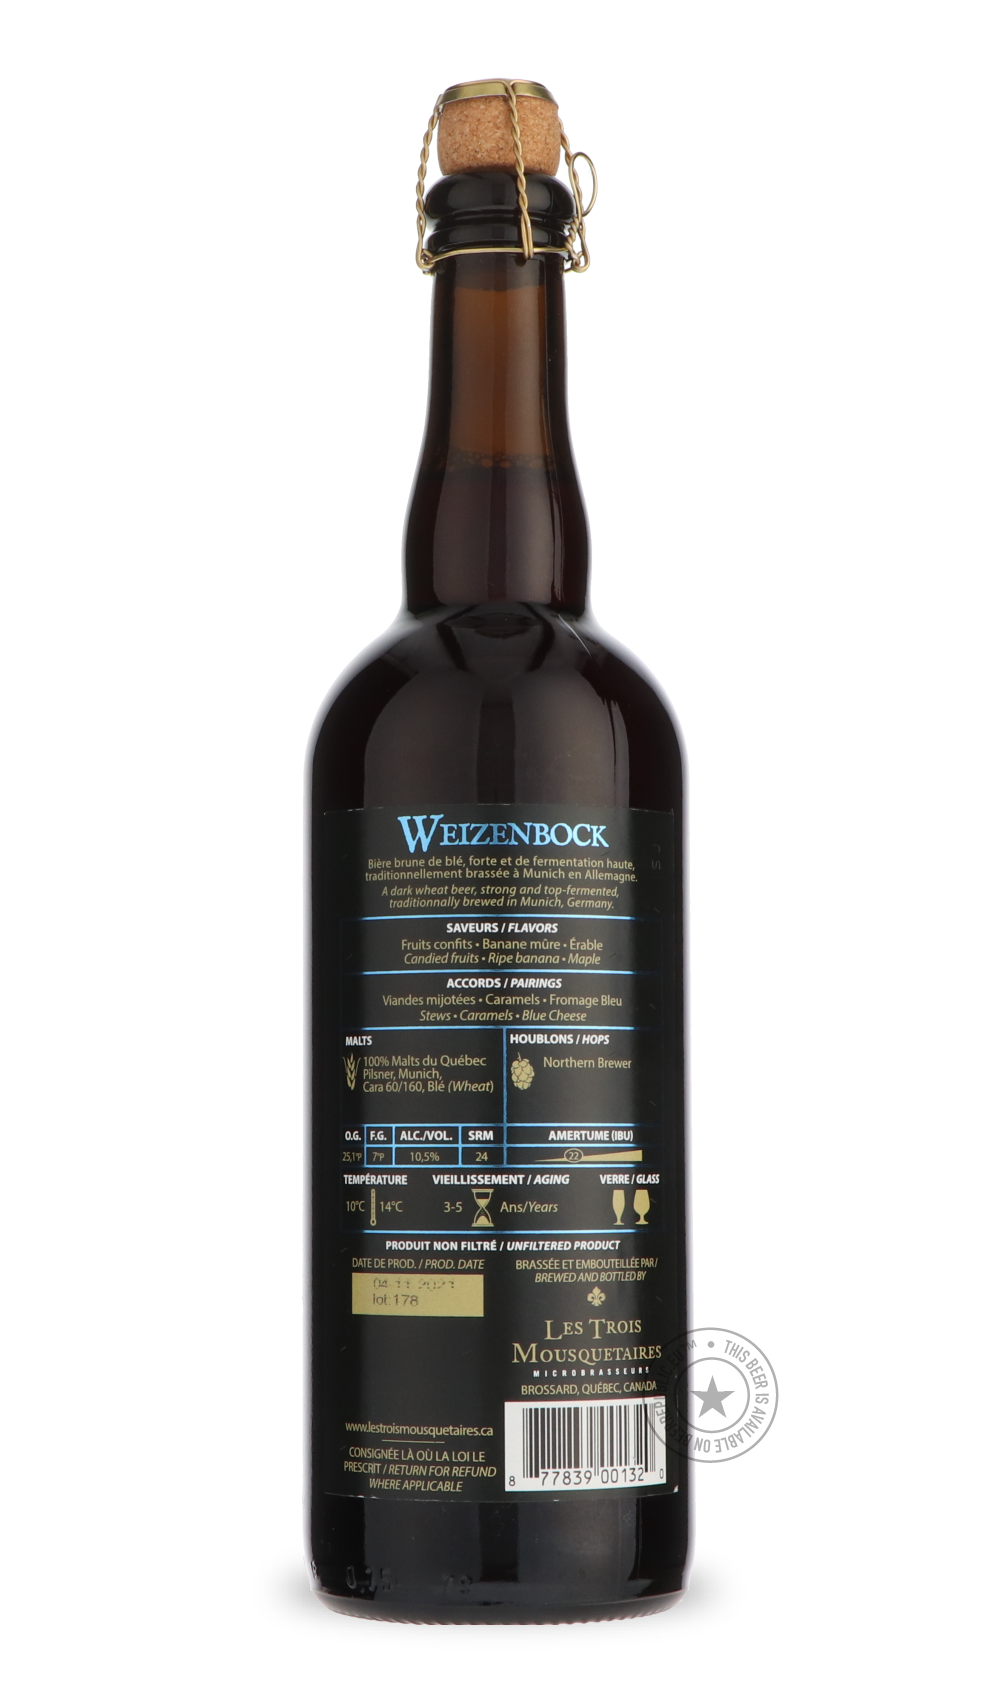 -Les Trois Mousquetaires- Grande Cuvée Weizenbock-Brown & Dark- Only @ Beer Republic - The best online beer store for American & Canadian craft beer - Buy beer online from the USA and Canada - Bier online kopen - Amerikaans bier kopen - Craft beer store - Craft beer kopen - Amerikanisch bier kaufen - Bier online kaufen - Acheter biere online - IPA - Stout - Porter - New England IPA - Hazy IPA - Imperial Stout - Barrel Aged - Barrel Aged Imperial Stout - Brown - Dark beer - Blond - Blonde - Pilsner - Lager -